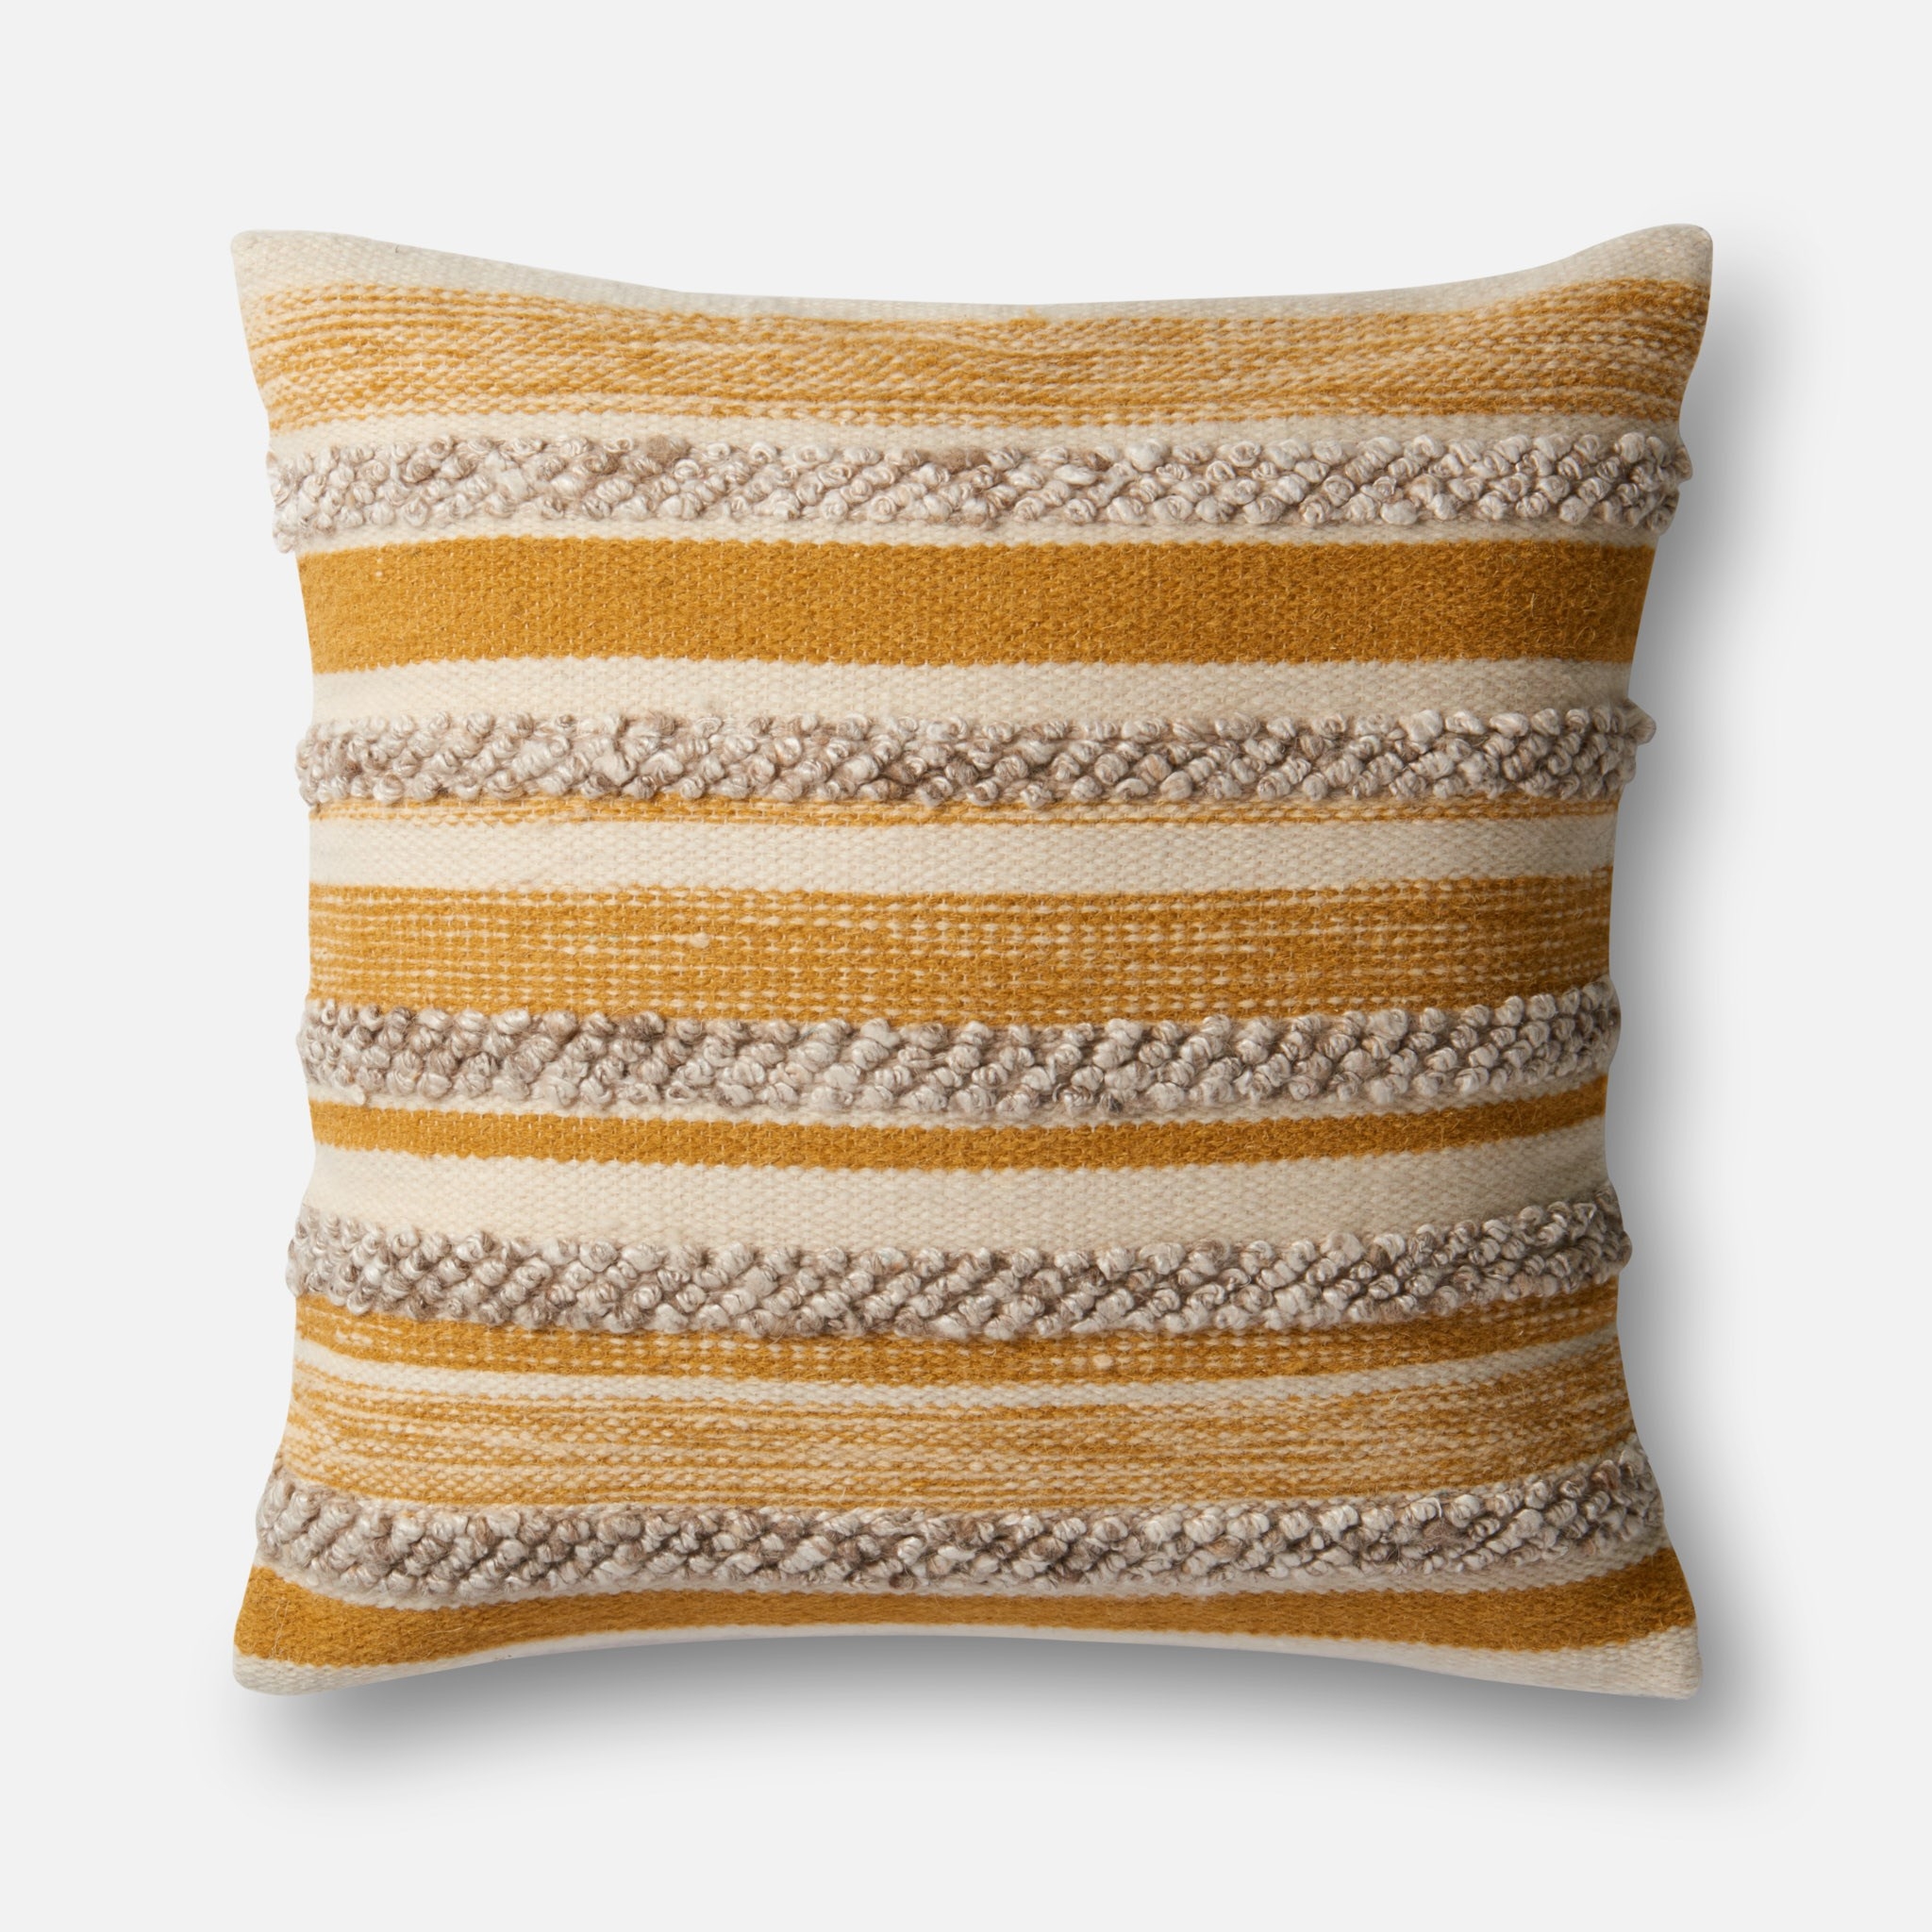 PILLOW COVER - GOLD / IVORY - Image 0